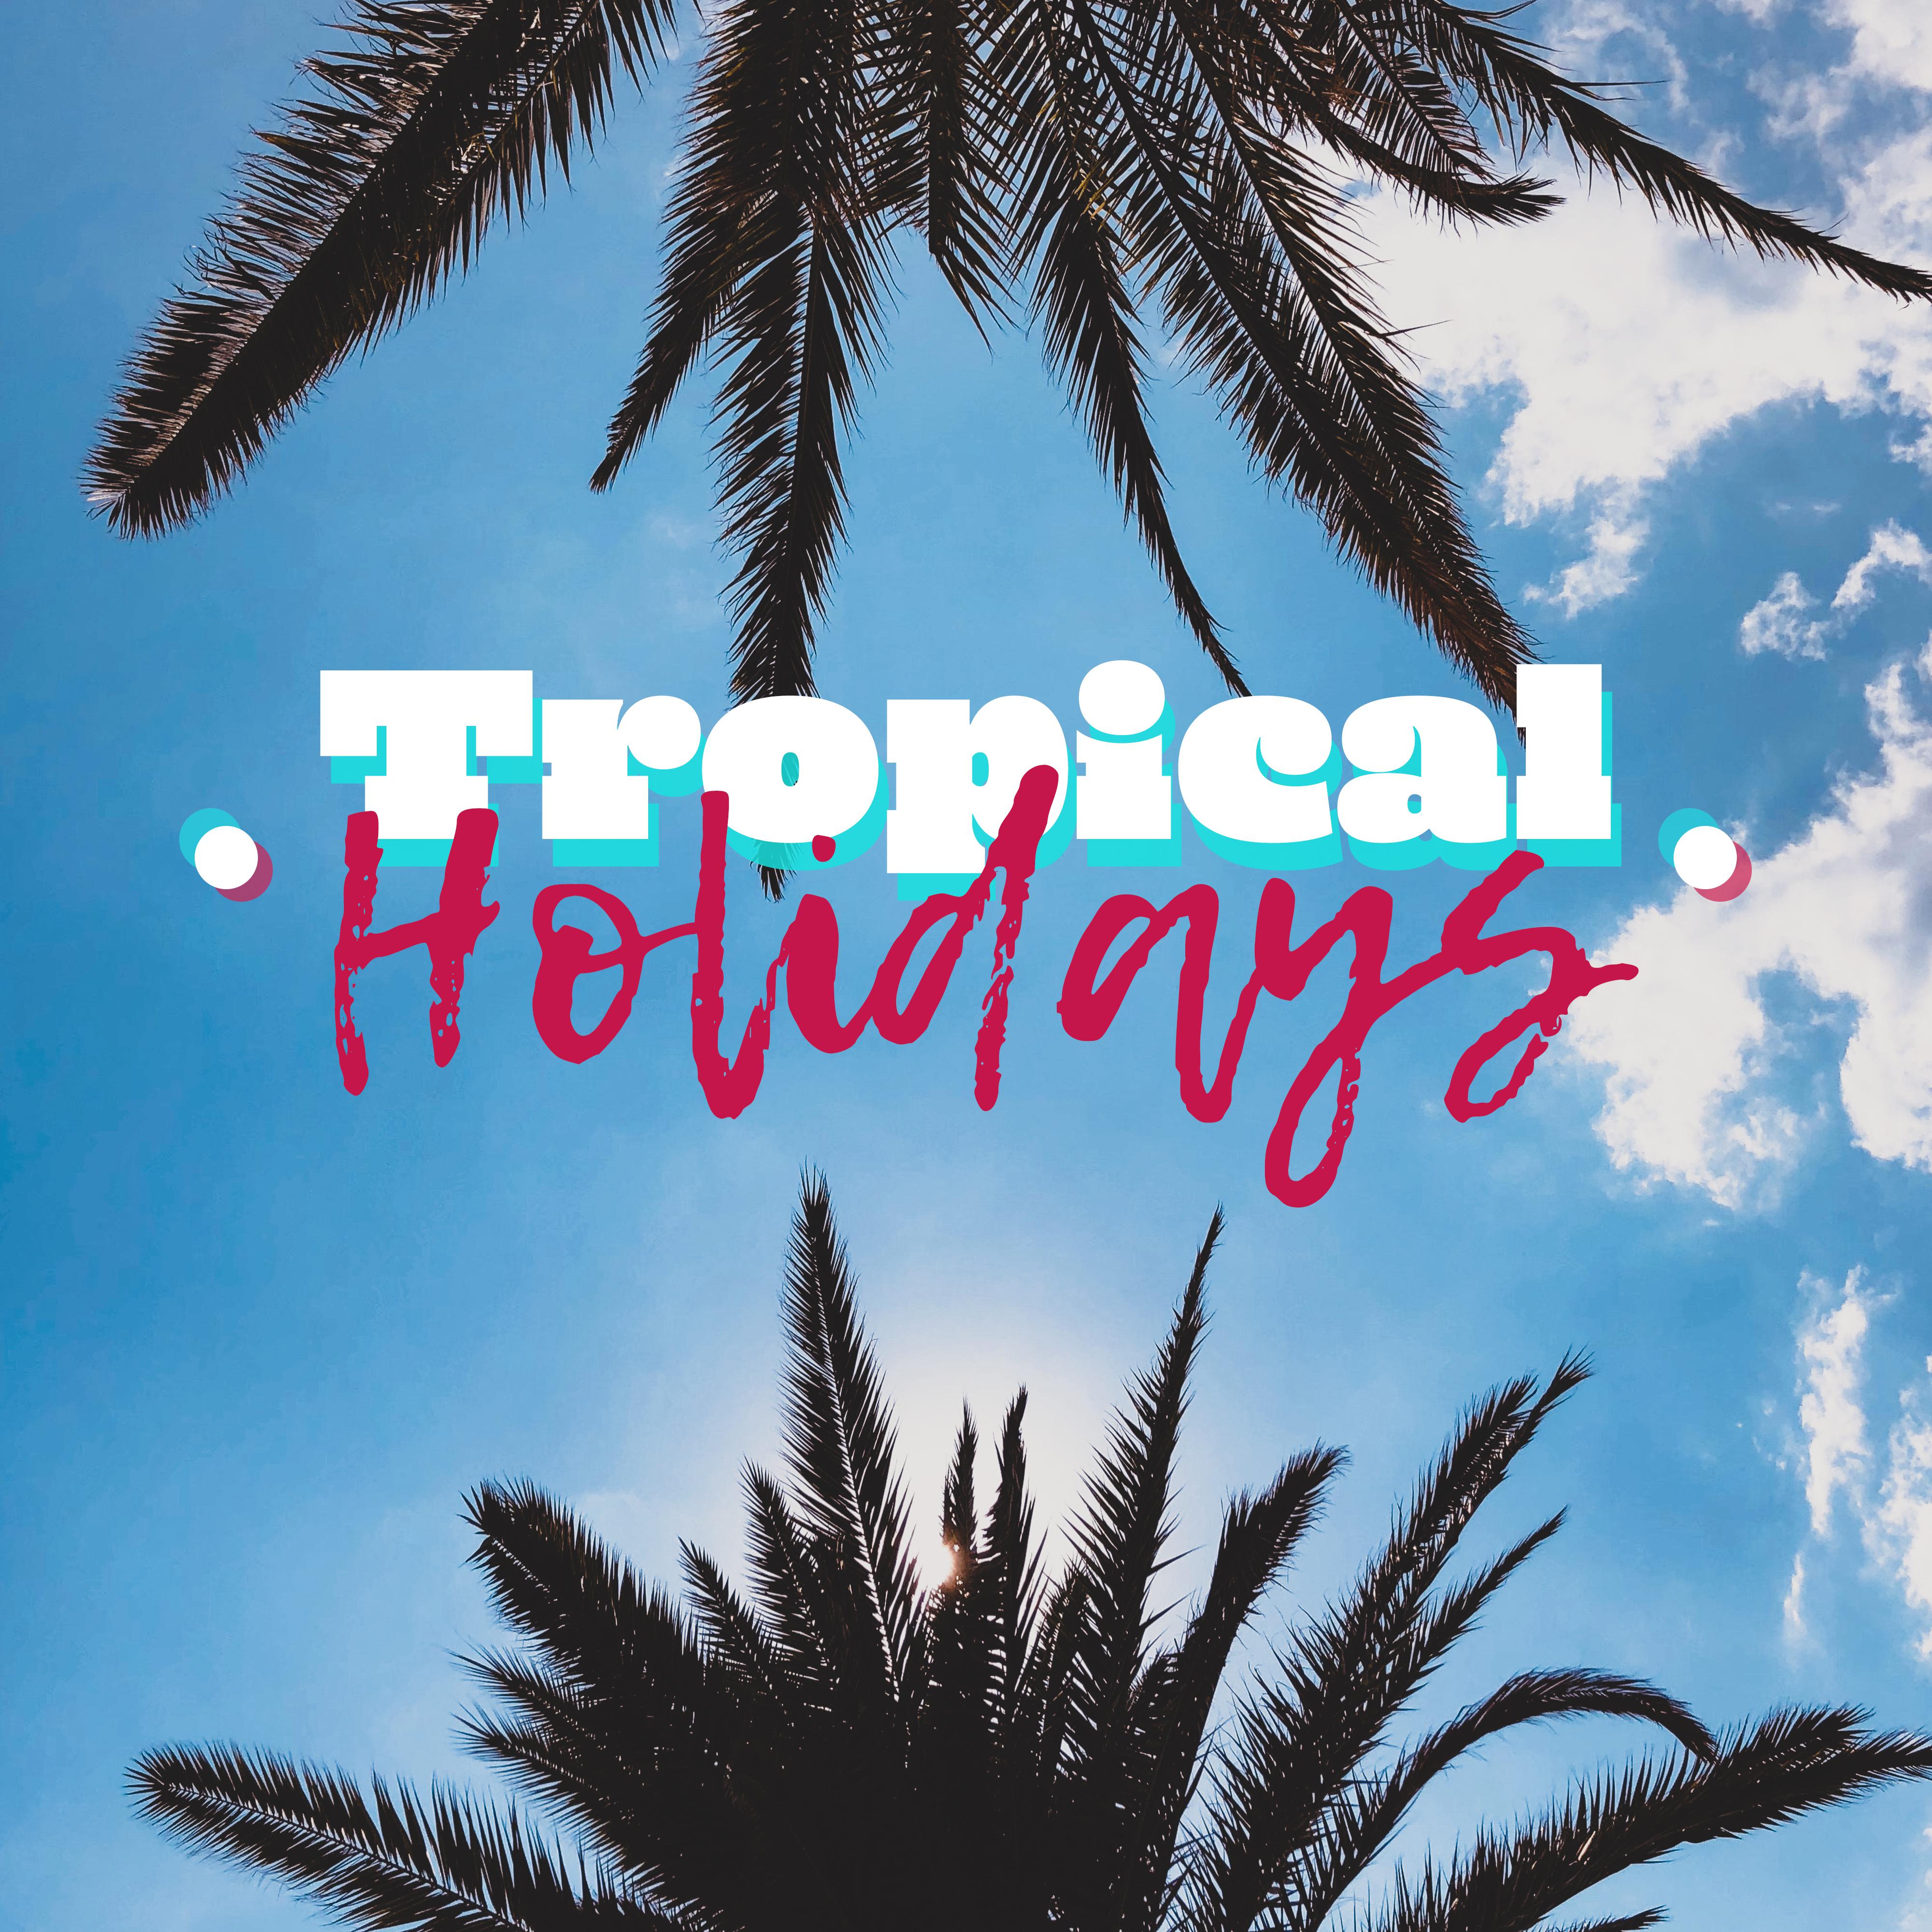 Tropical Holidays: Music for Holidays, Sunbathing on the Beach, Drinks, Relaxation and Rest, Total Peace and Tranquillity